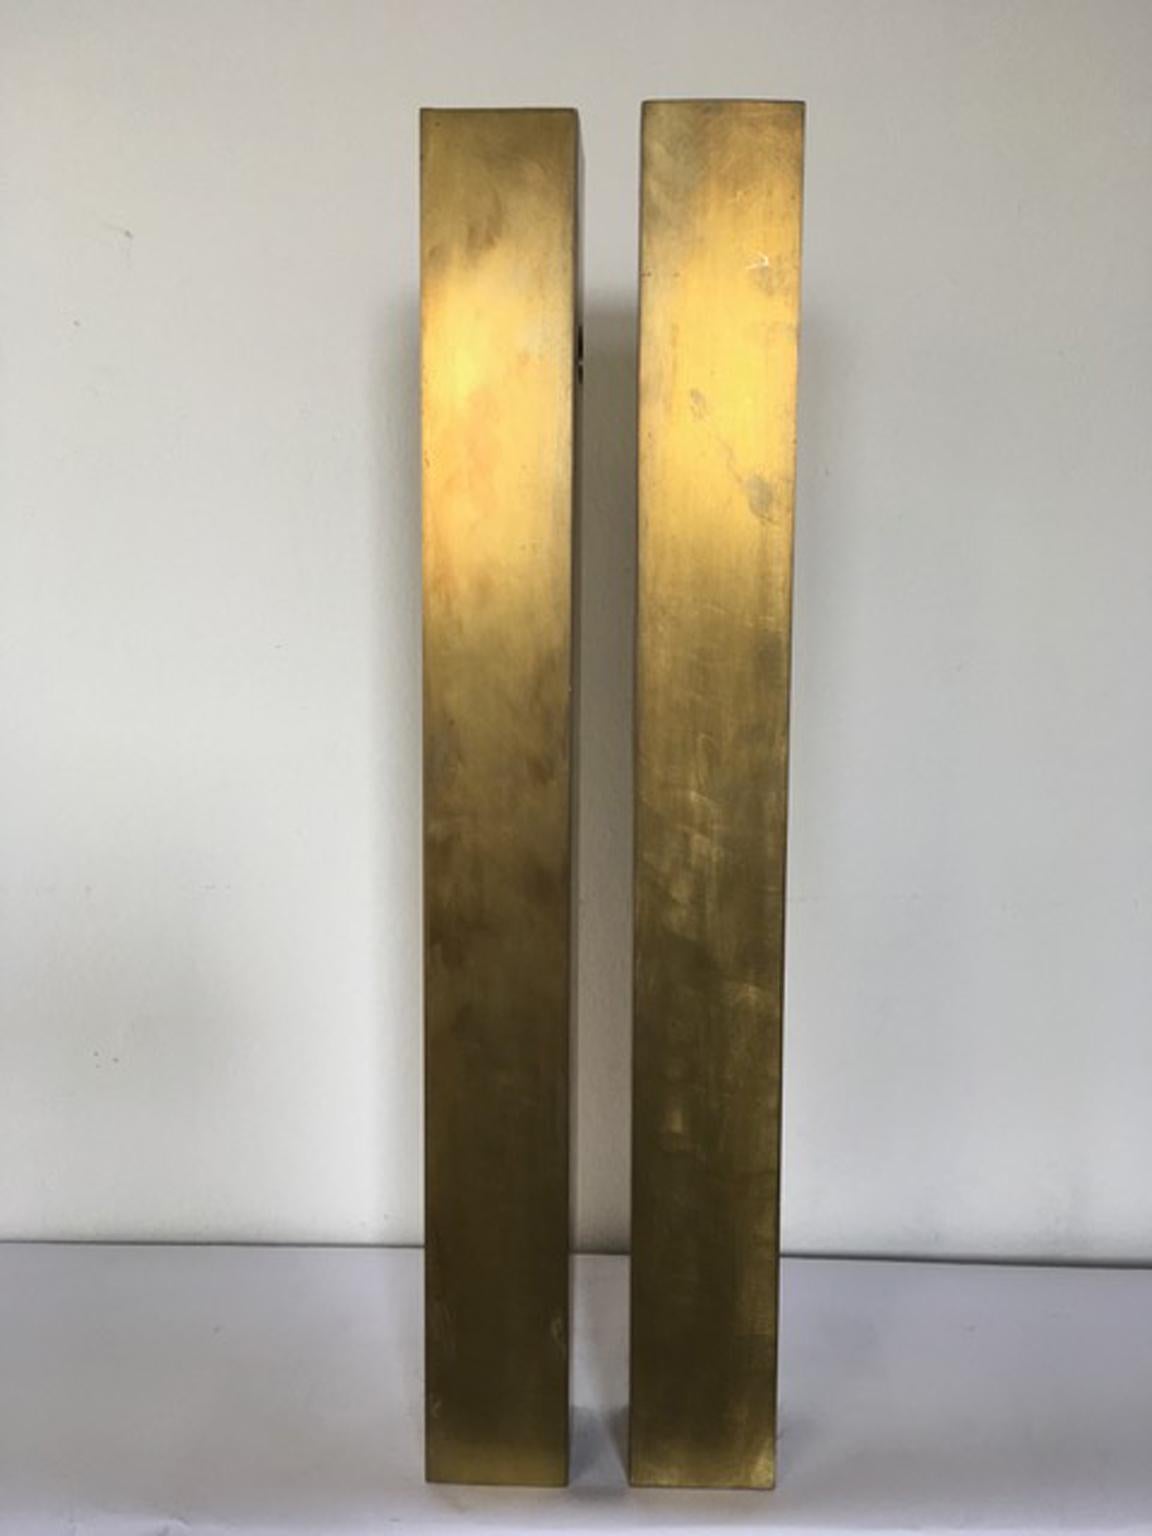 Italy 1998 the Skyscrapers Brass Abstract Sculpture For Sale 12